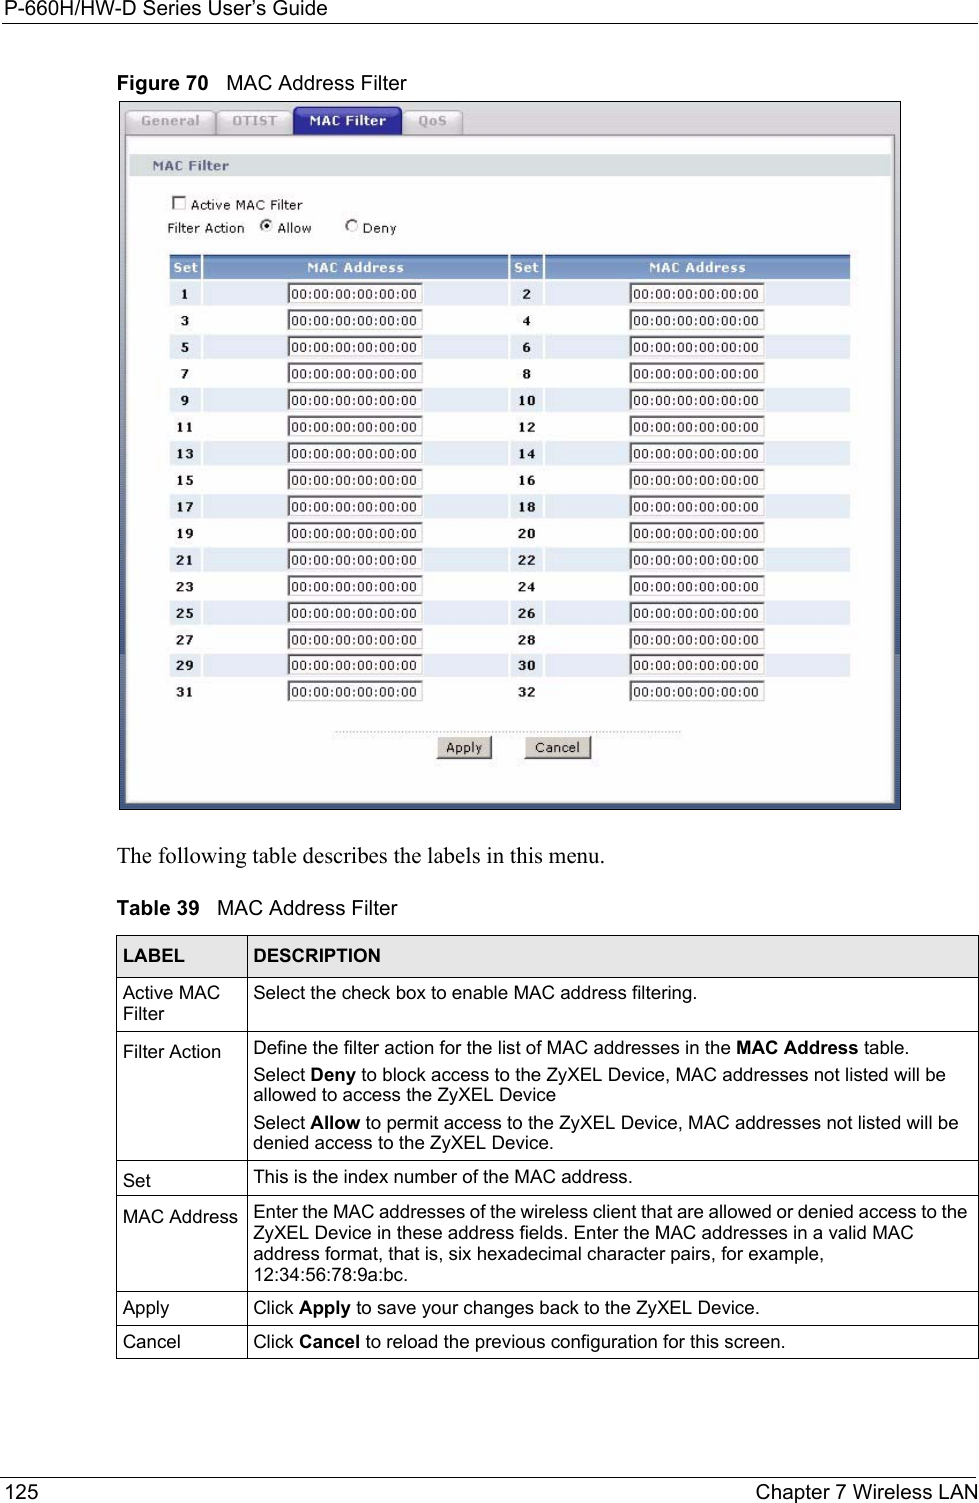 P-660H/HW-D Series User’s Guide125 Chapter 7 Wireless LANFigure 70   MAC Address FilterThe following table describes the labels in this menu.Table 39   MAC Address FilterLABEL DESCRIPTIONActive MAC FilterSelect the check box to enable MAC address filtering.Filter Action  Define the filter action for the list of MAC addresses in the MAC Address table. Select Deny to block access to the ZyXEL Device, MAC addresses not listed will be allowed to access the ZyXEL Device Select Allow to permit access to the ZyXEL Device, MAC addresses not listed will be denied access to the ZyXEL Device. Set This is the index number of the MAC address.MAC Address Enter the MAC addresses of the wireless client that are allowed or denied access to the ZyXEL Device in these address fields. Enter the MAC addresses in a valid MAC address format, that is, six hexadecimal character pairs, for example, 12:34:56:78:9a:bc.Apply Click Apply to save your changes back to the ZyXEL Device.Cancel Click Cancel to reload the previous configuration for this screen.